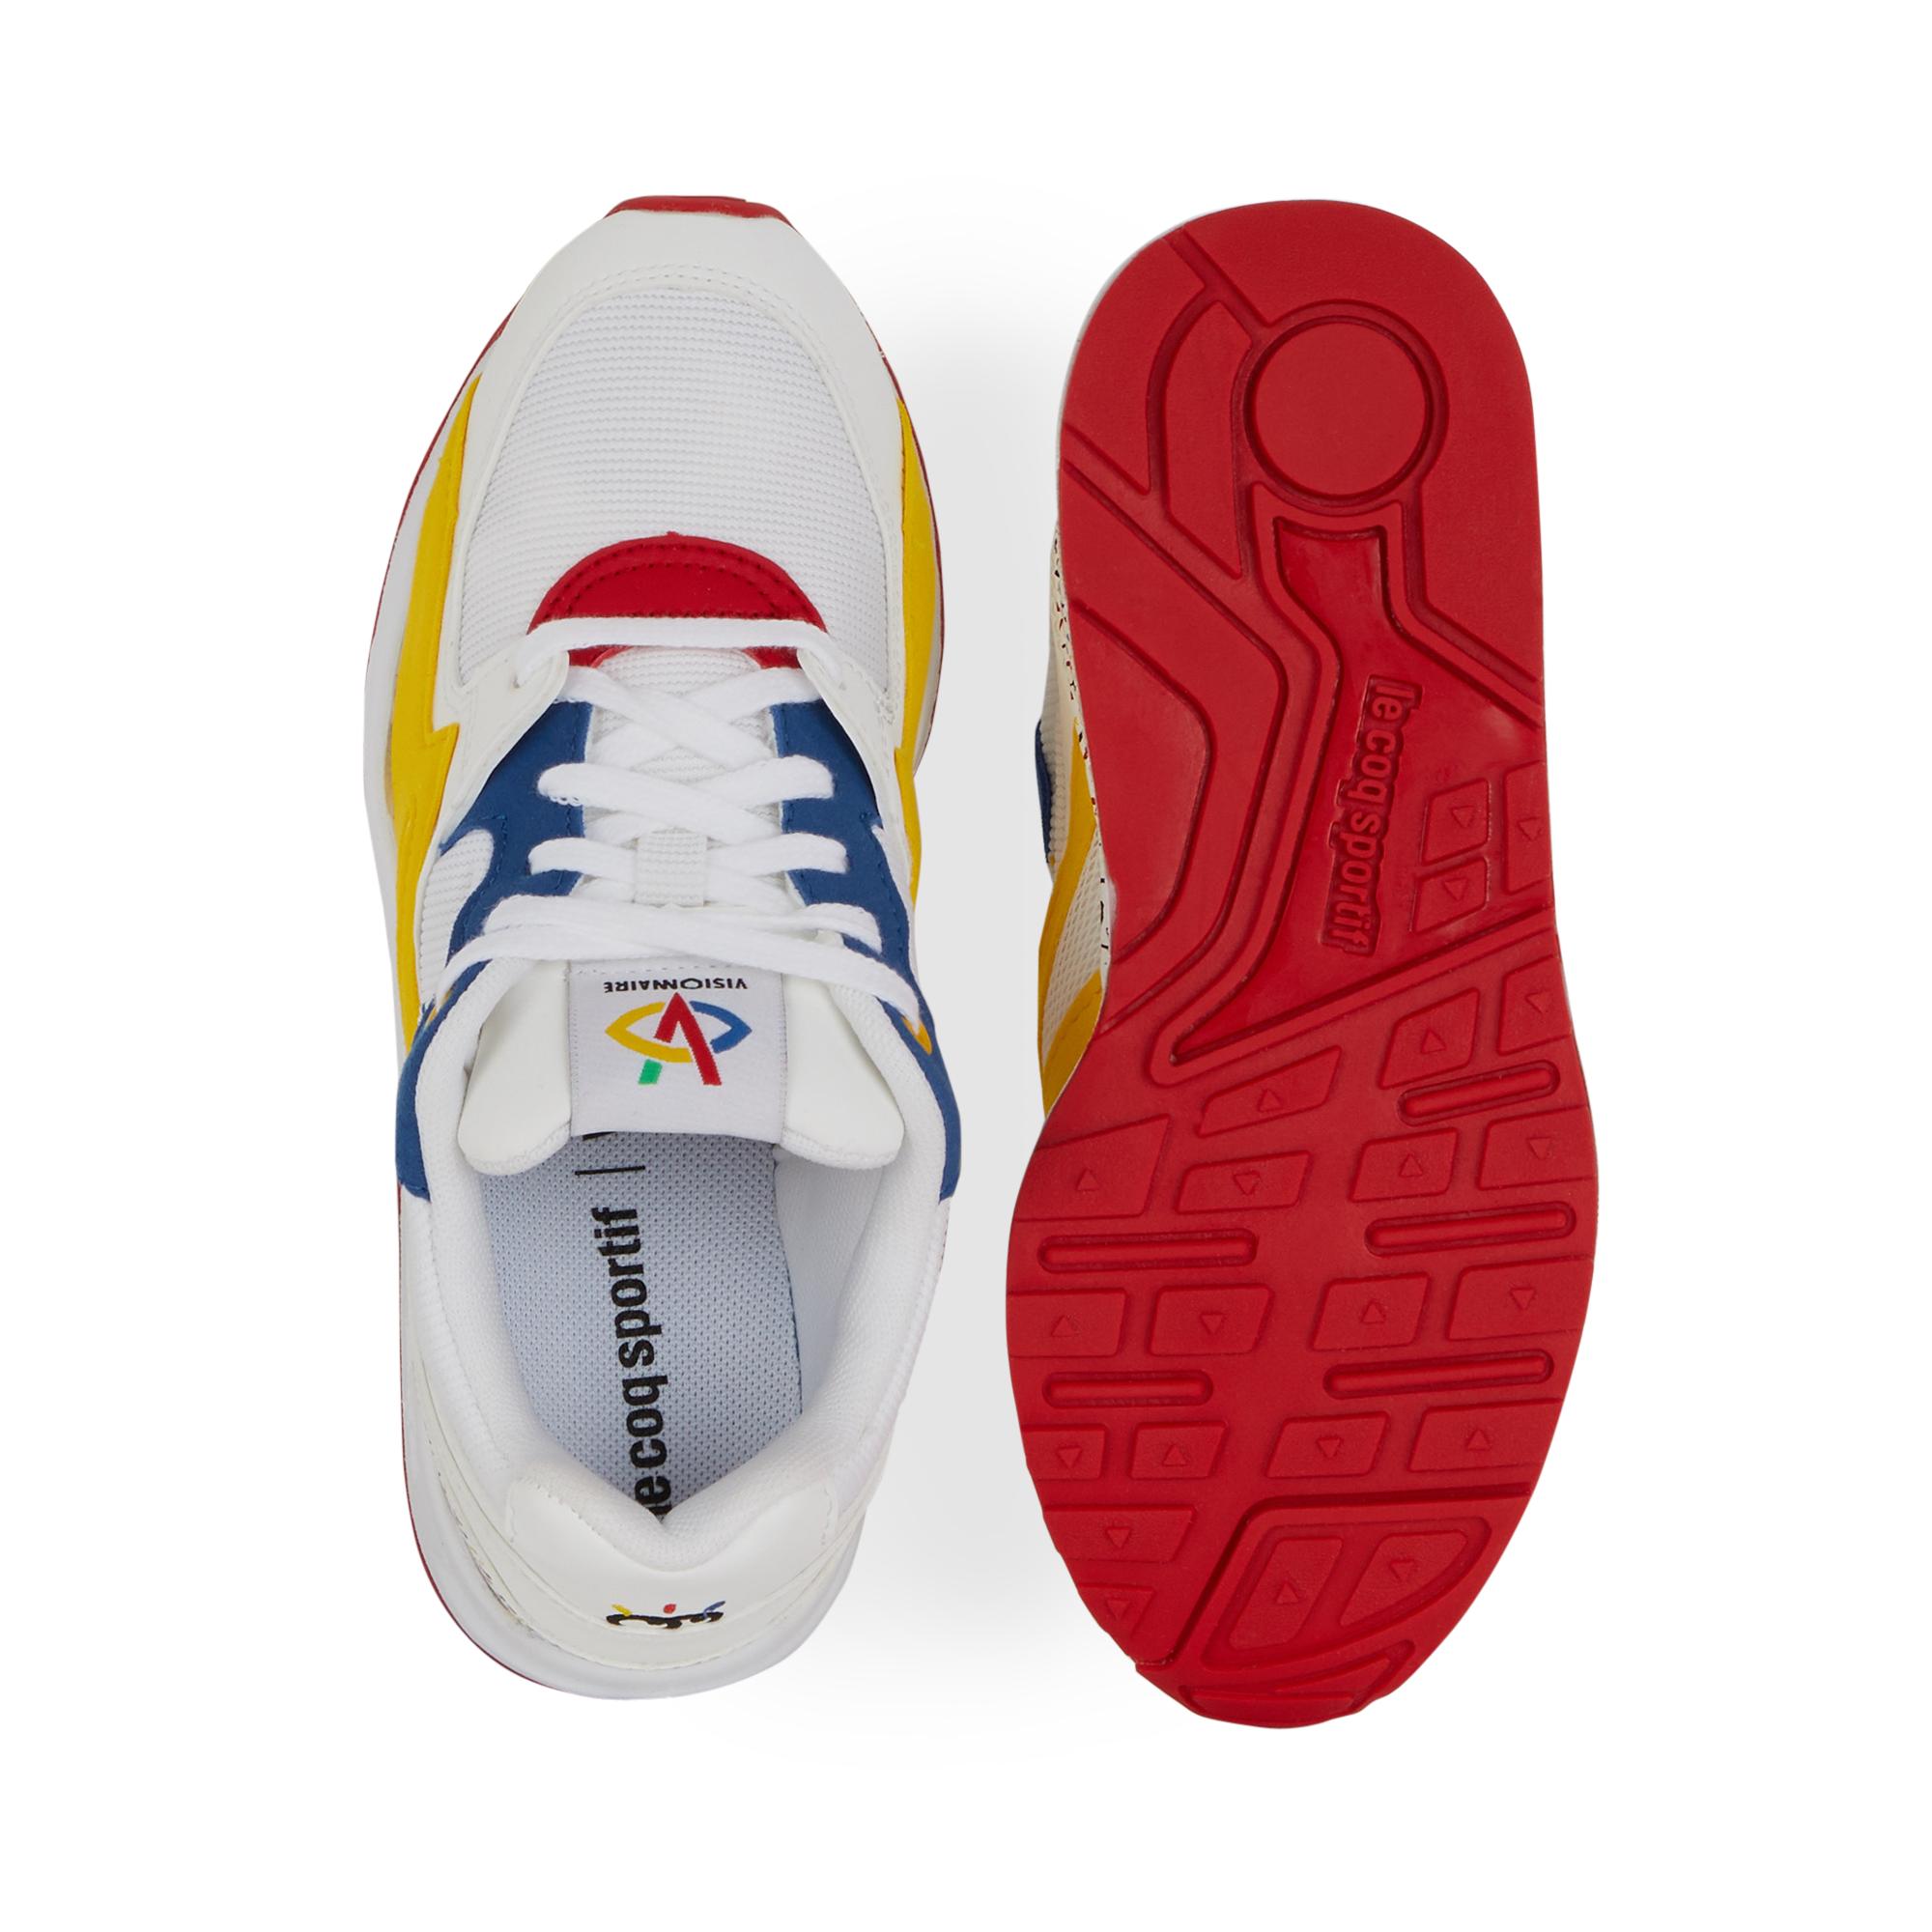 Buy > coq sportif visionnaire > in stock